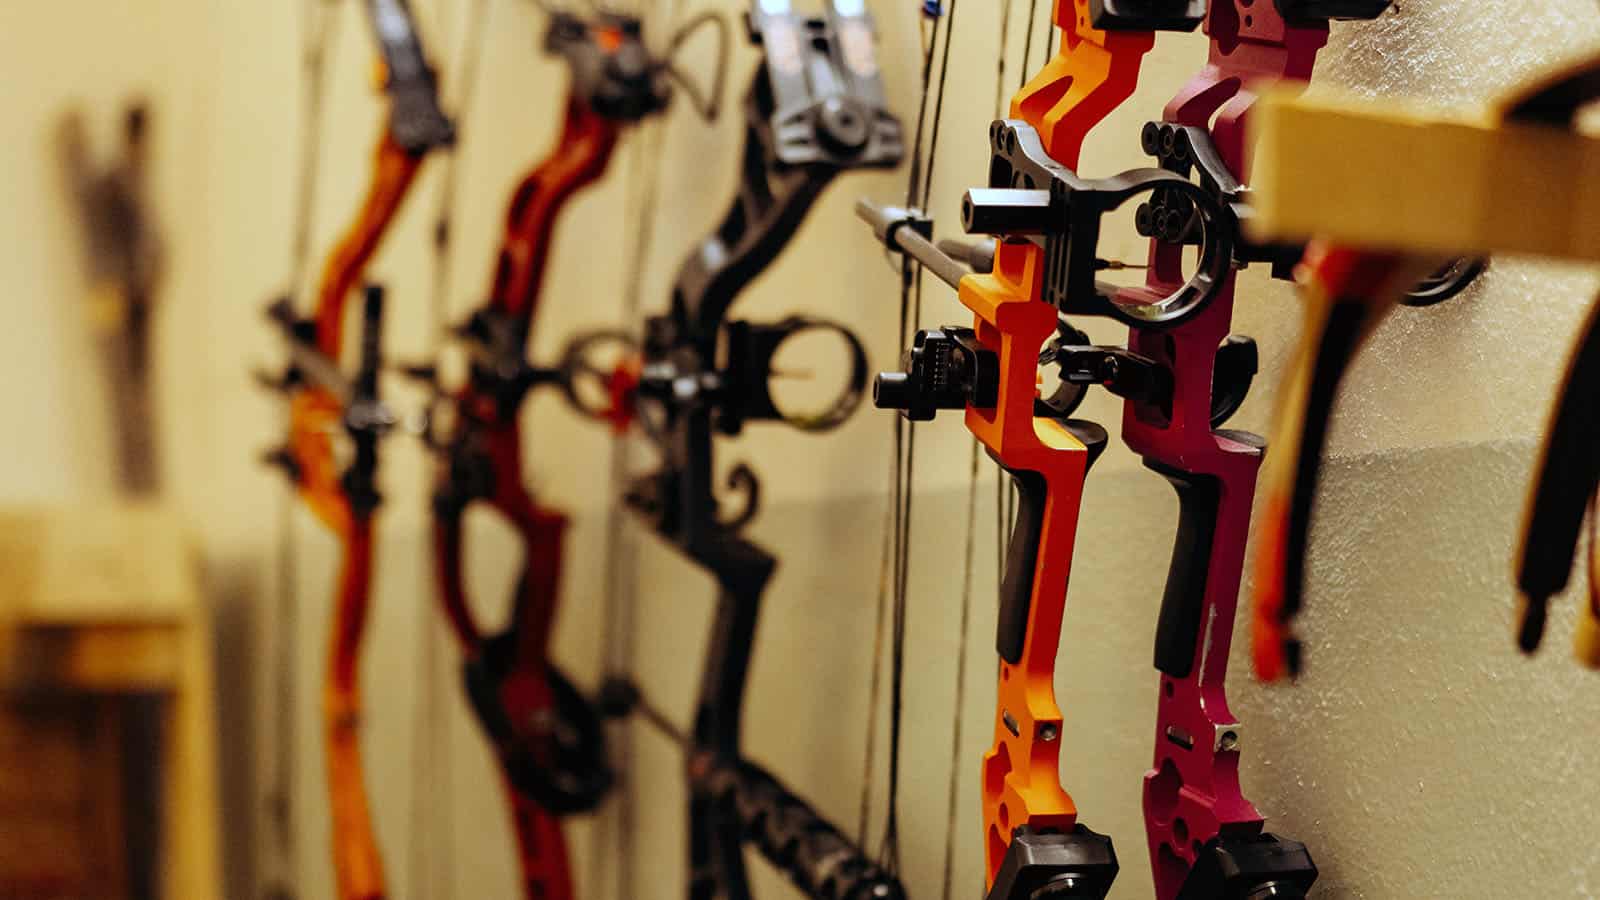 Bowhunting 101 - Compound Bows